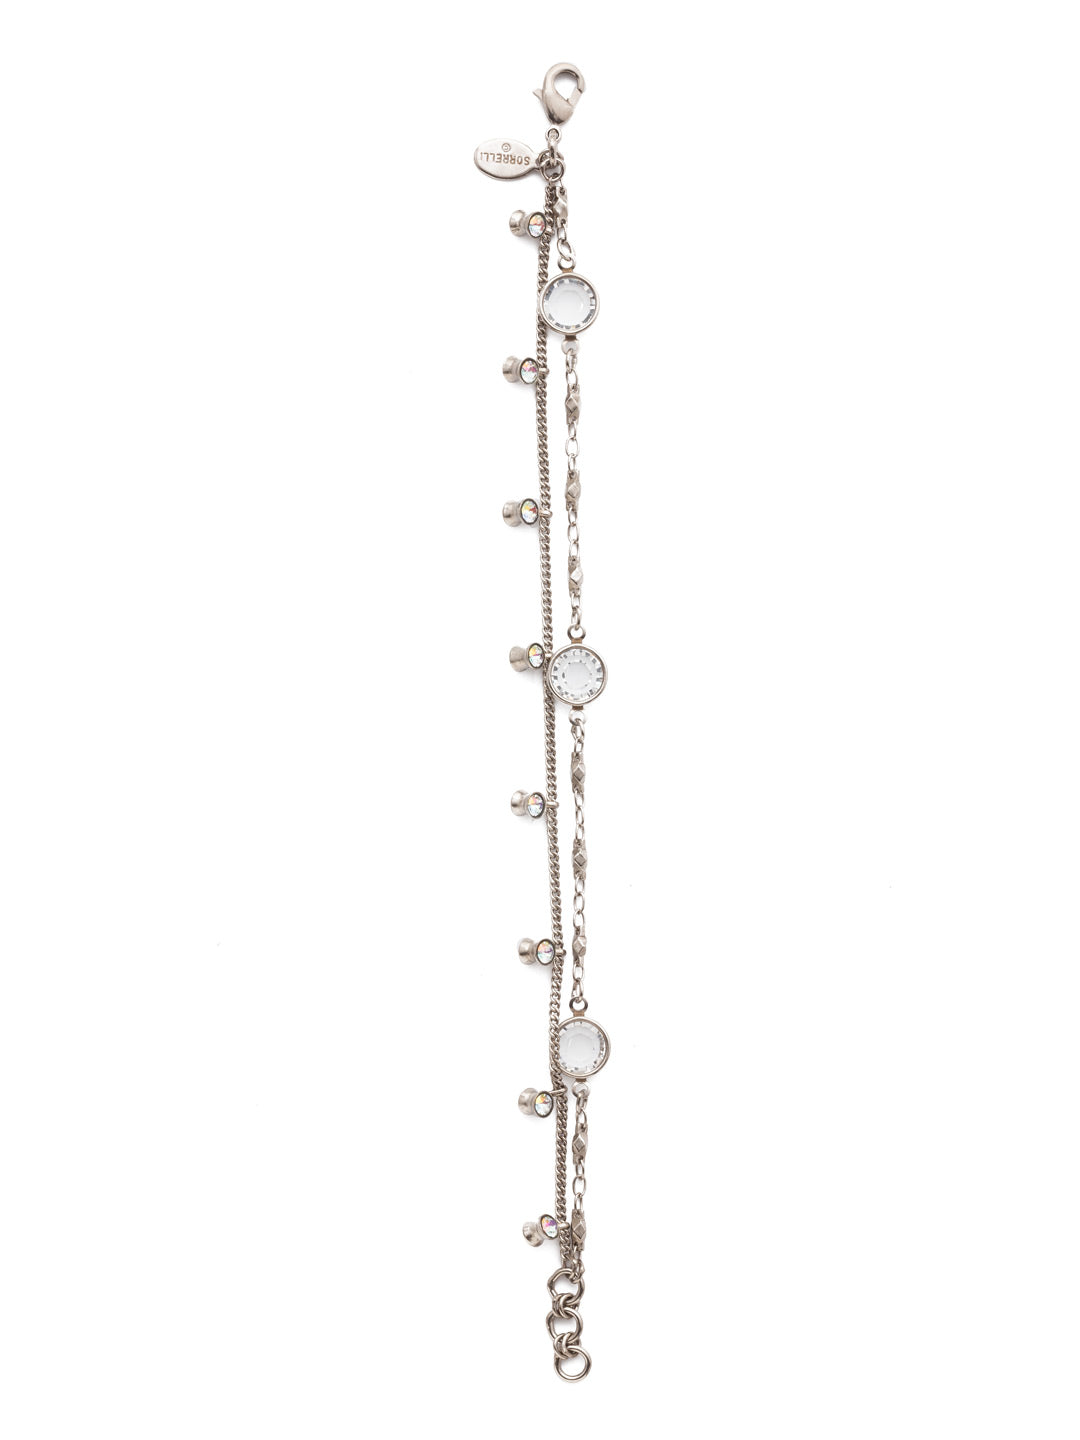 Dewdrop Layered Bracelet - BEK36ASCRE - <p>Add a dainty dash of crystal stones to your outfit for that something a bit extra special with this classic crystal layered bracelet. From Sorrelli's Crystal Envy collection in our Antique Silver-tone finish.</p>